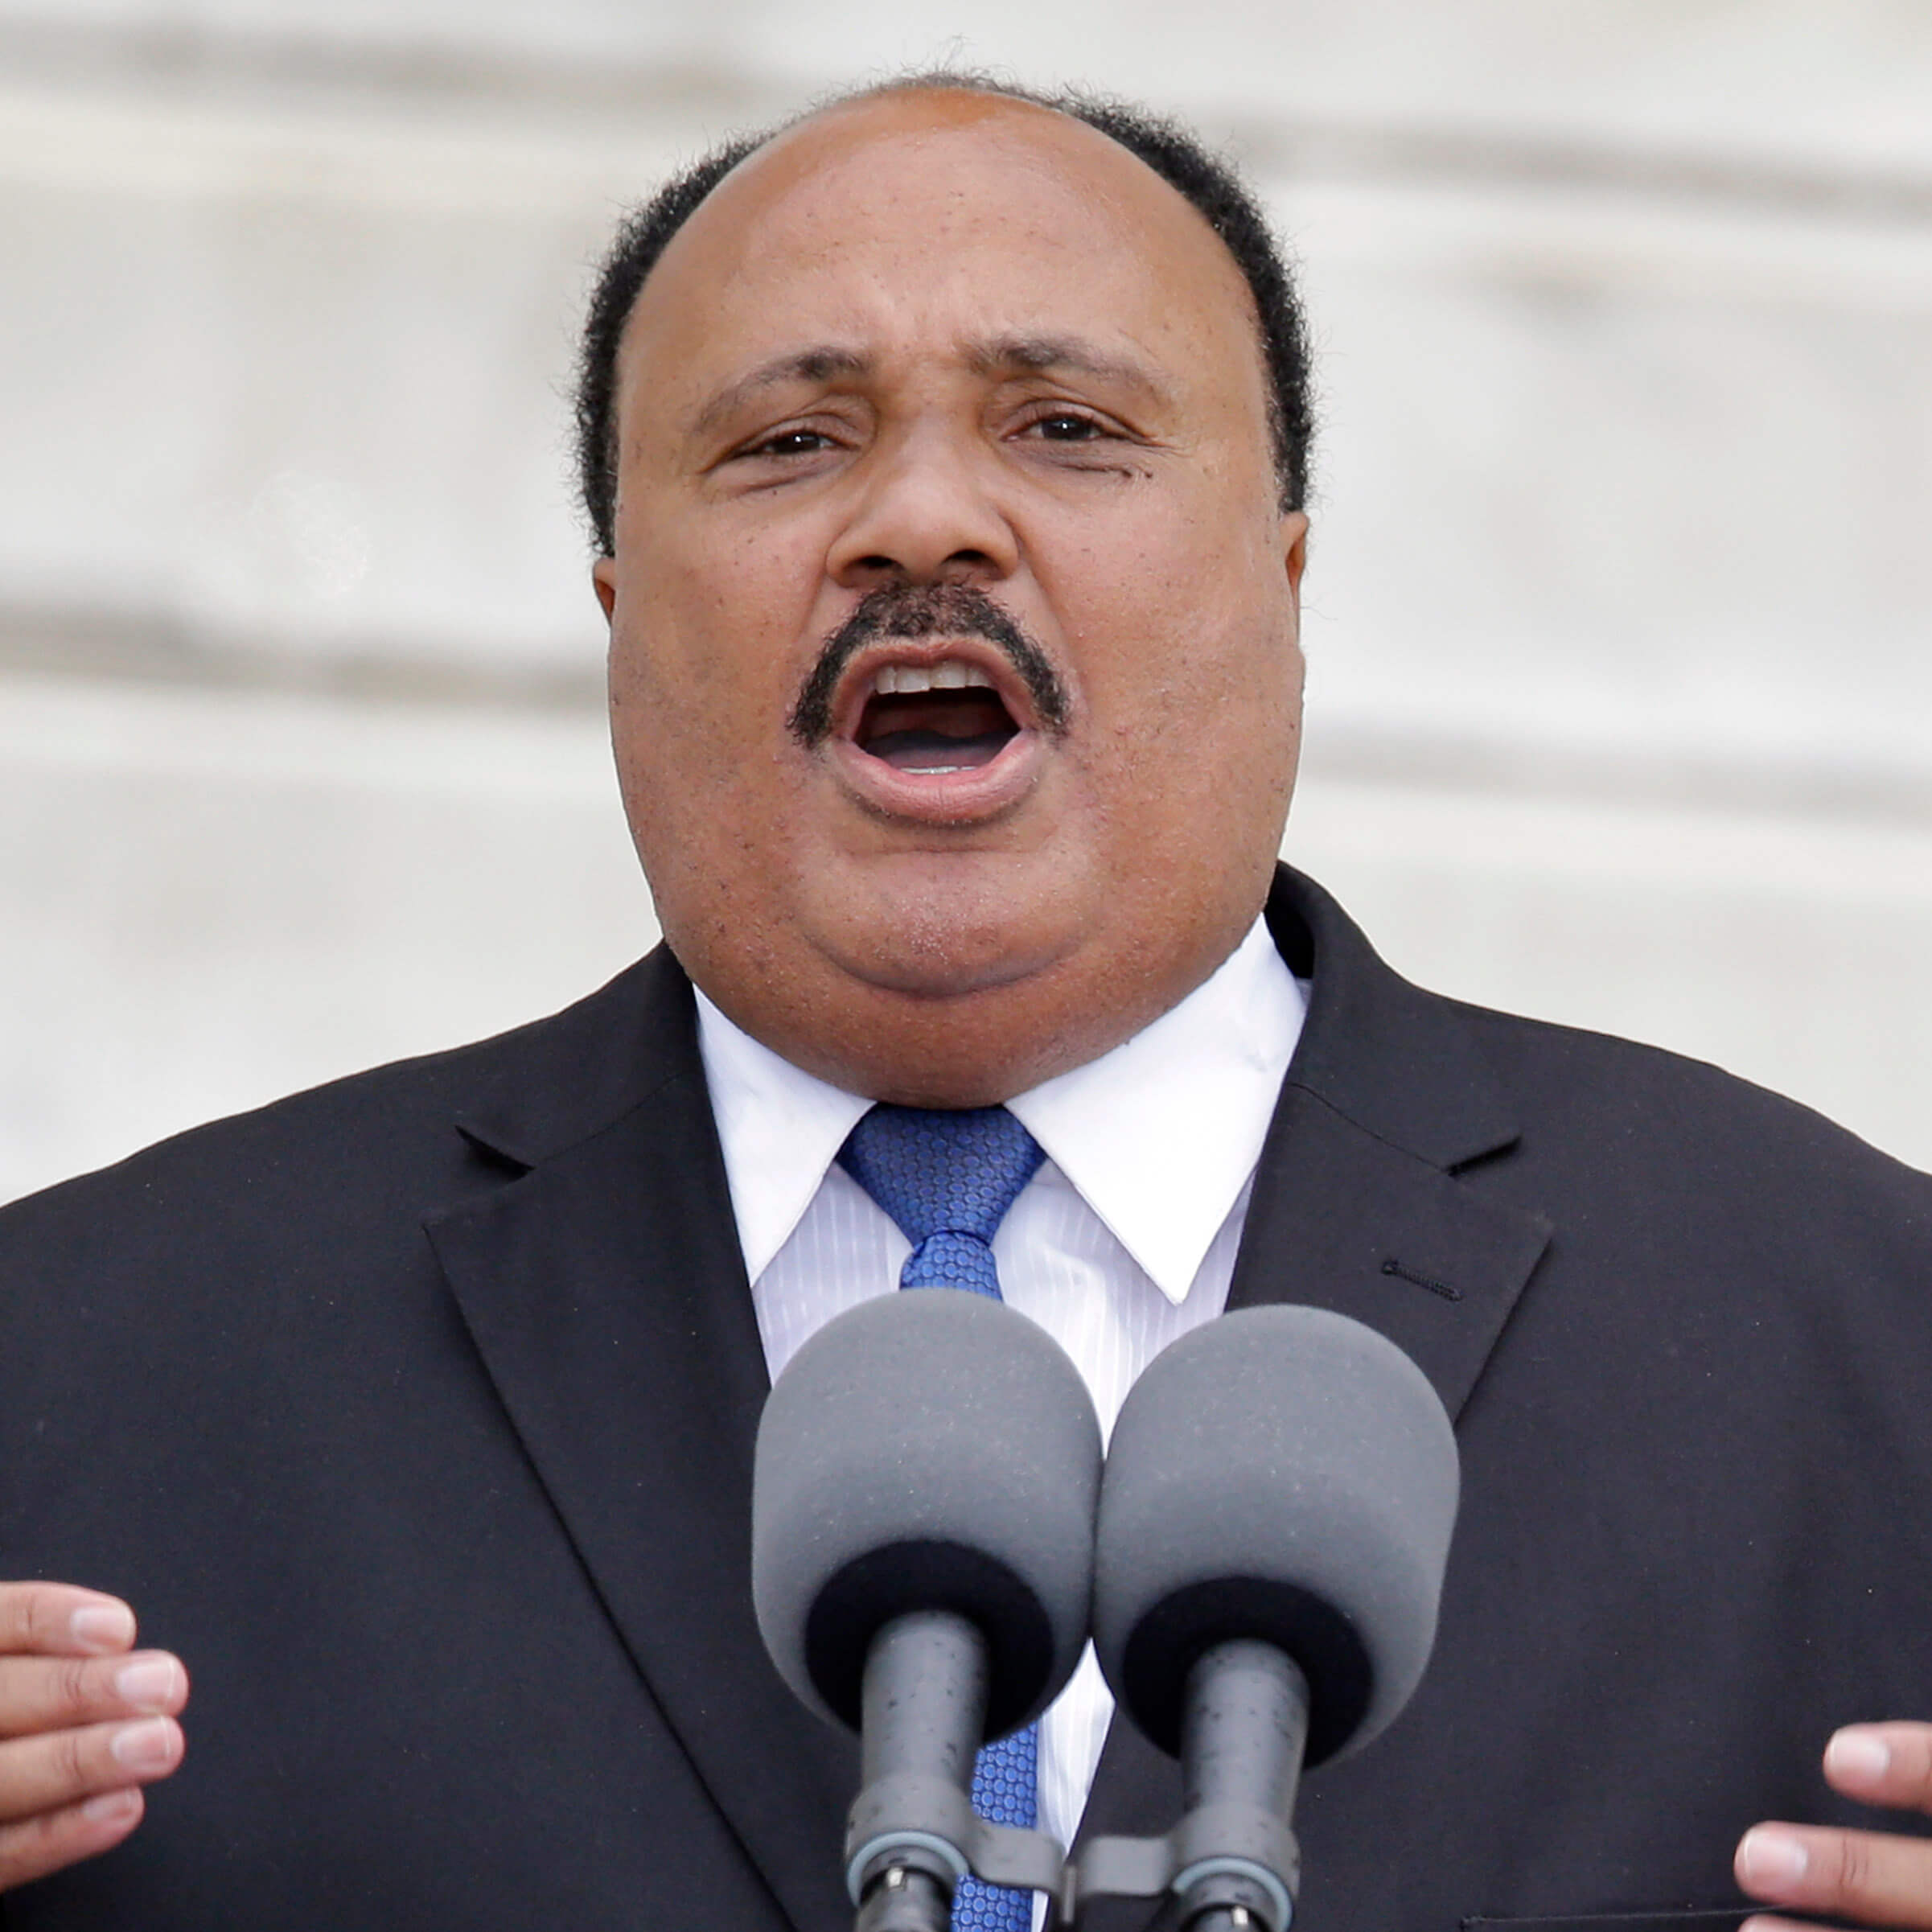 Martin Luther King Iii Age